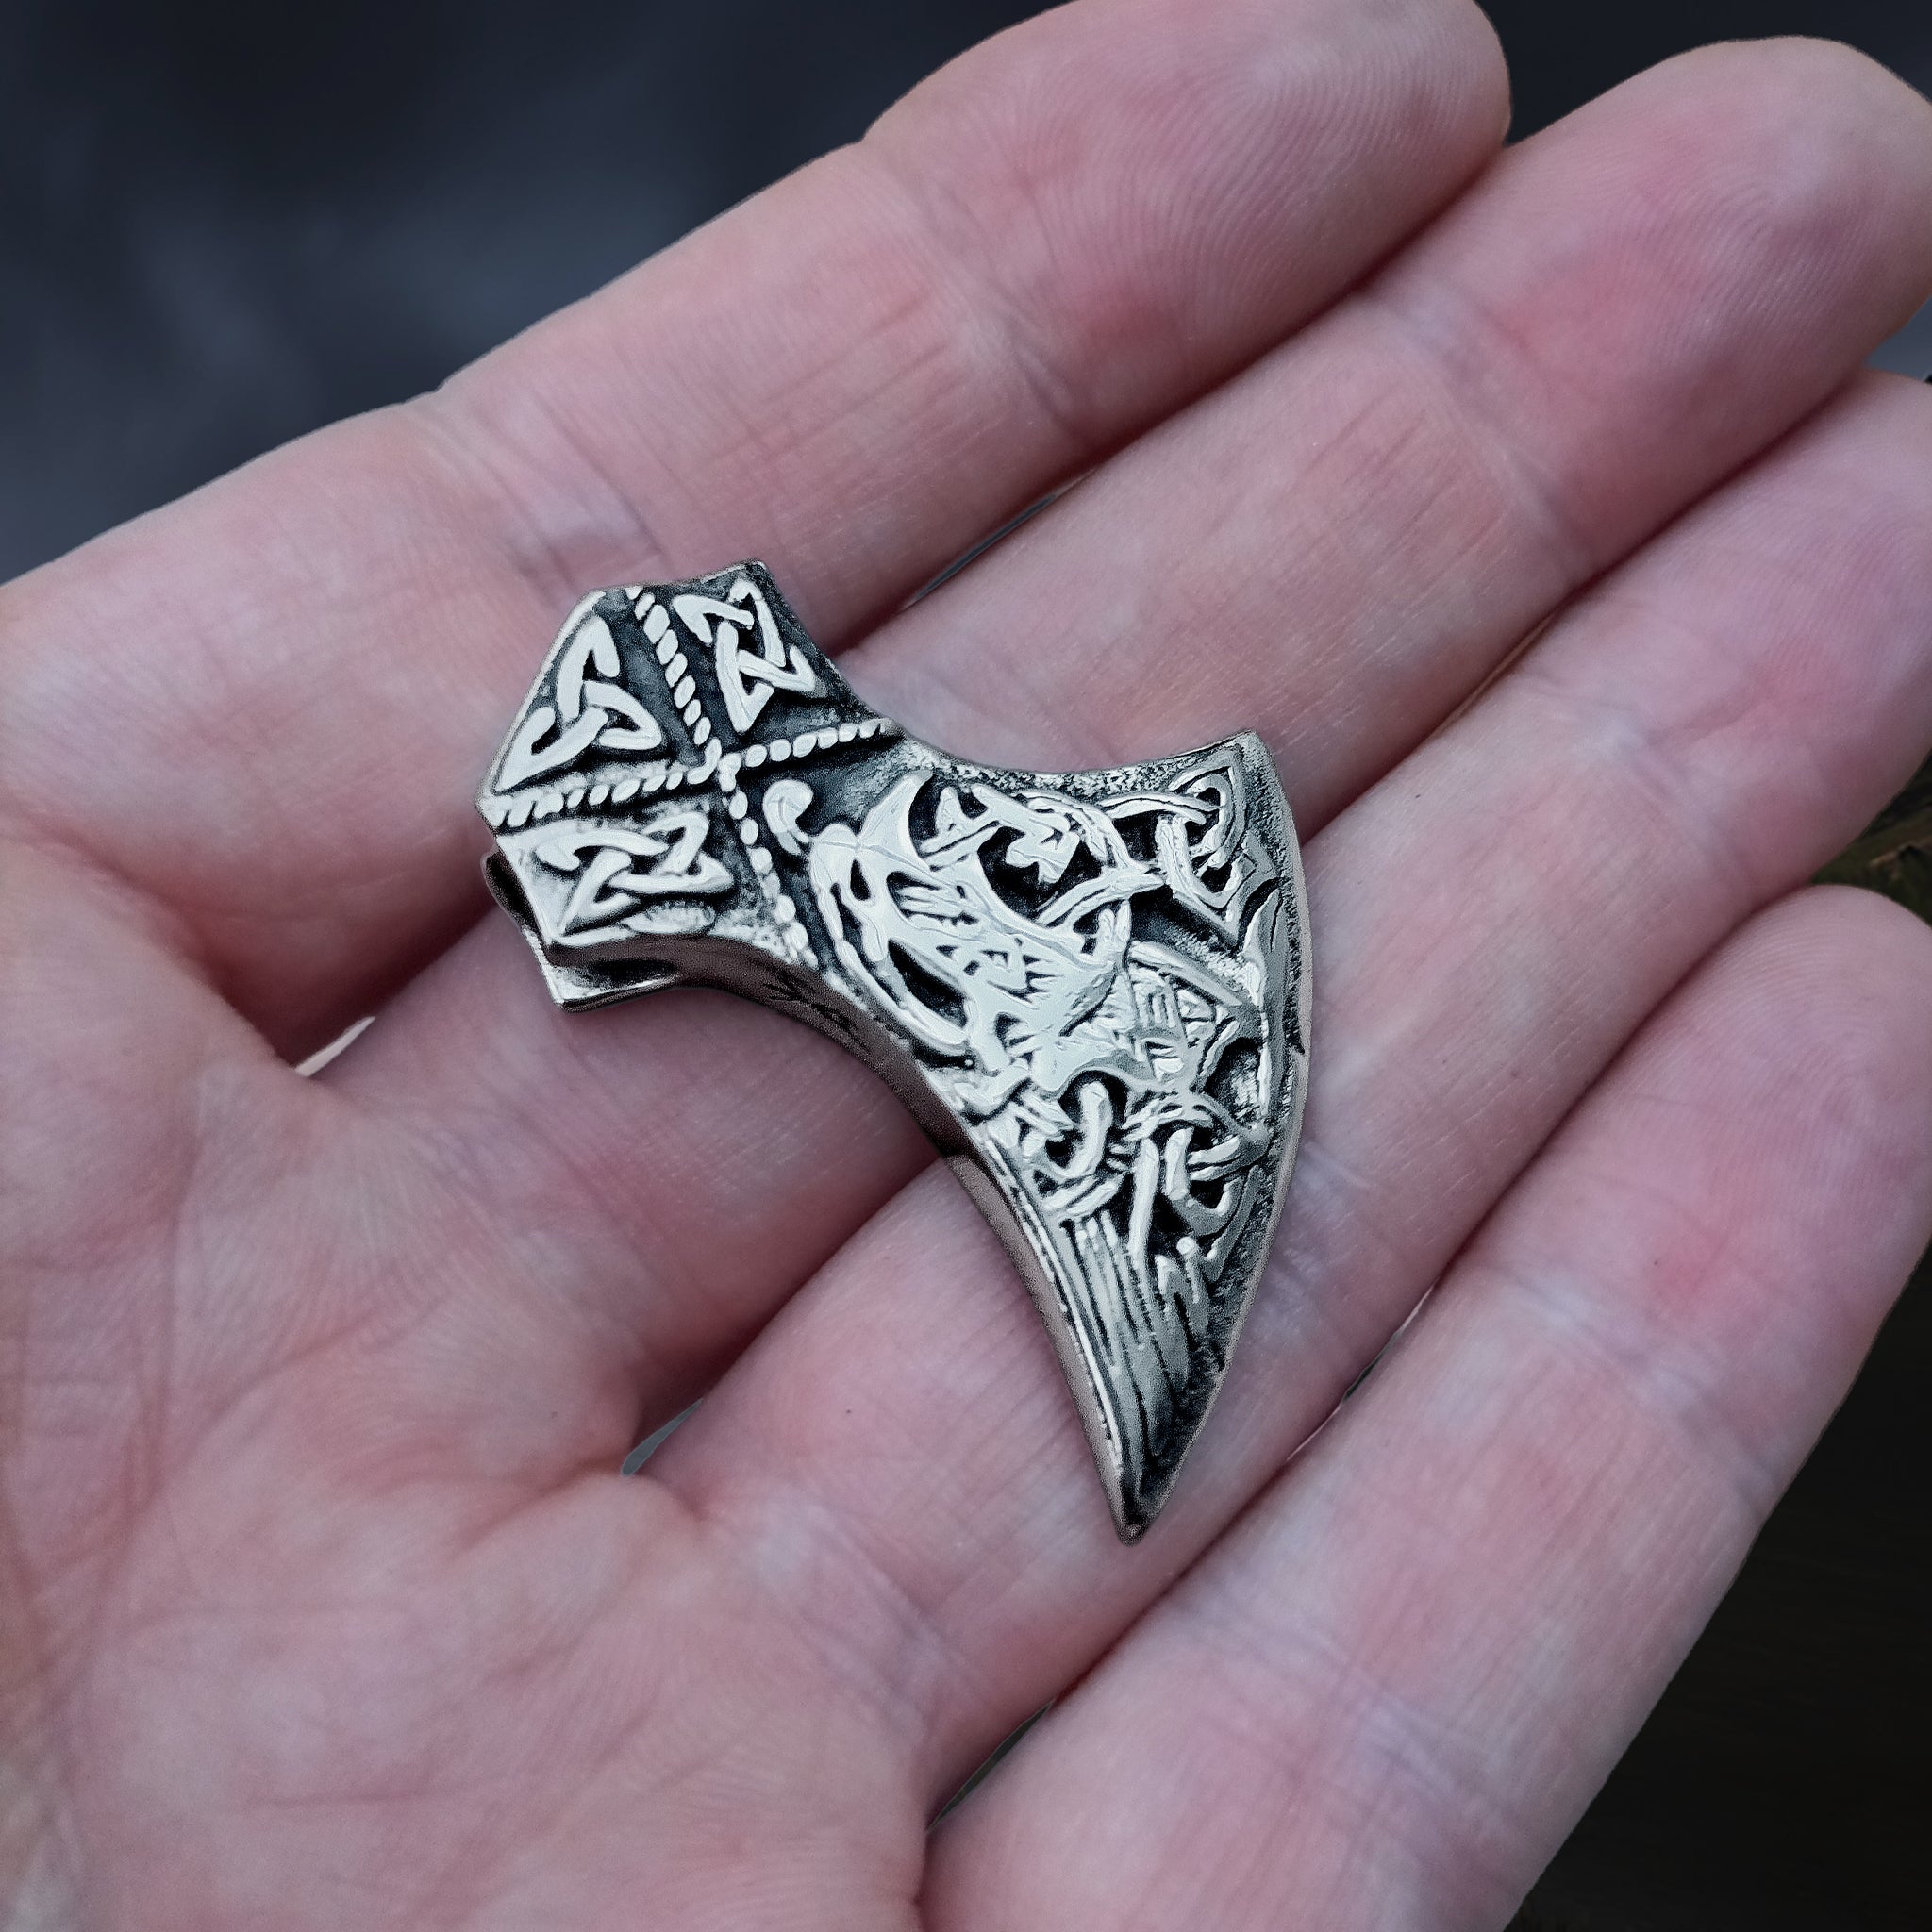 Silver Knotwork Viking Axe Head Pendant on Hand - Angle View